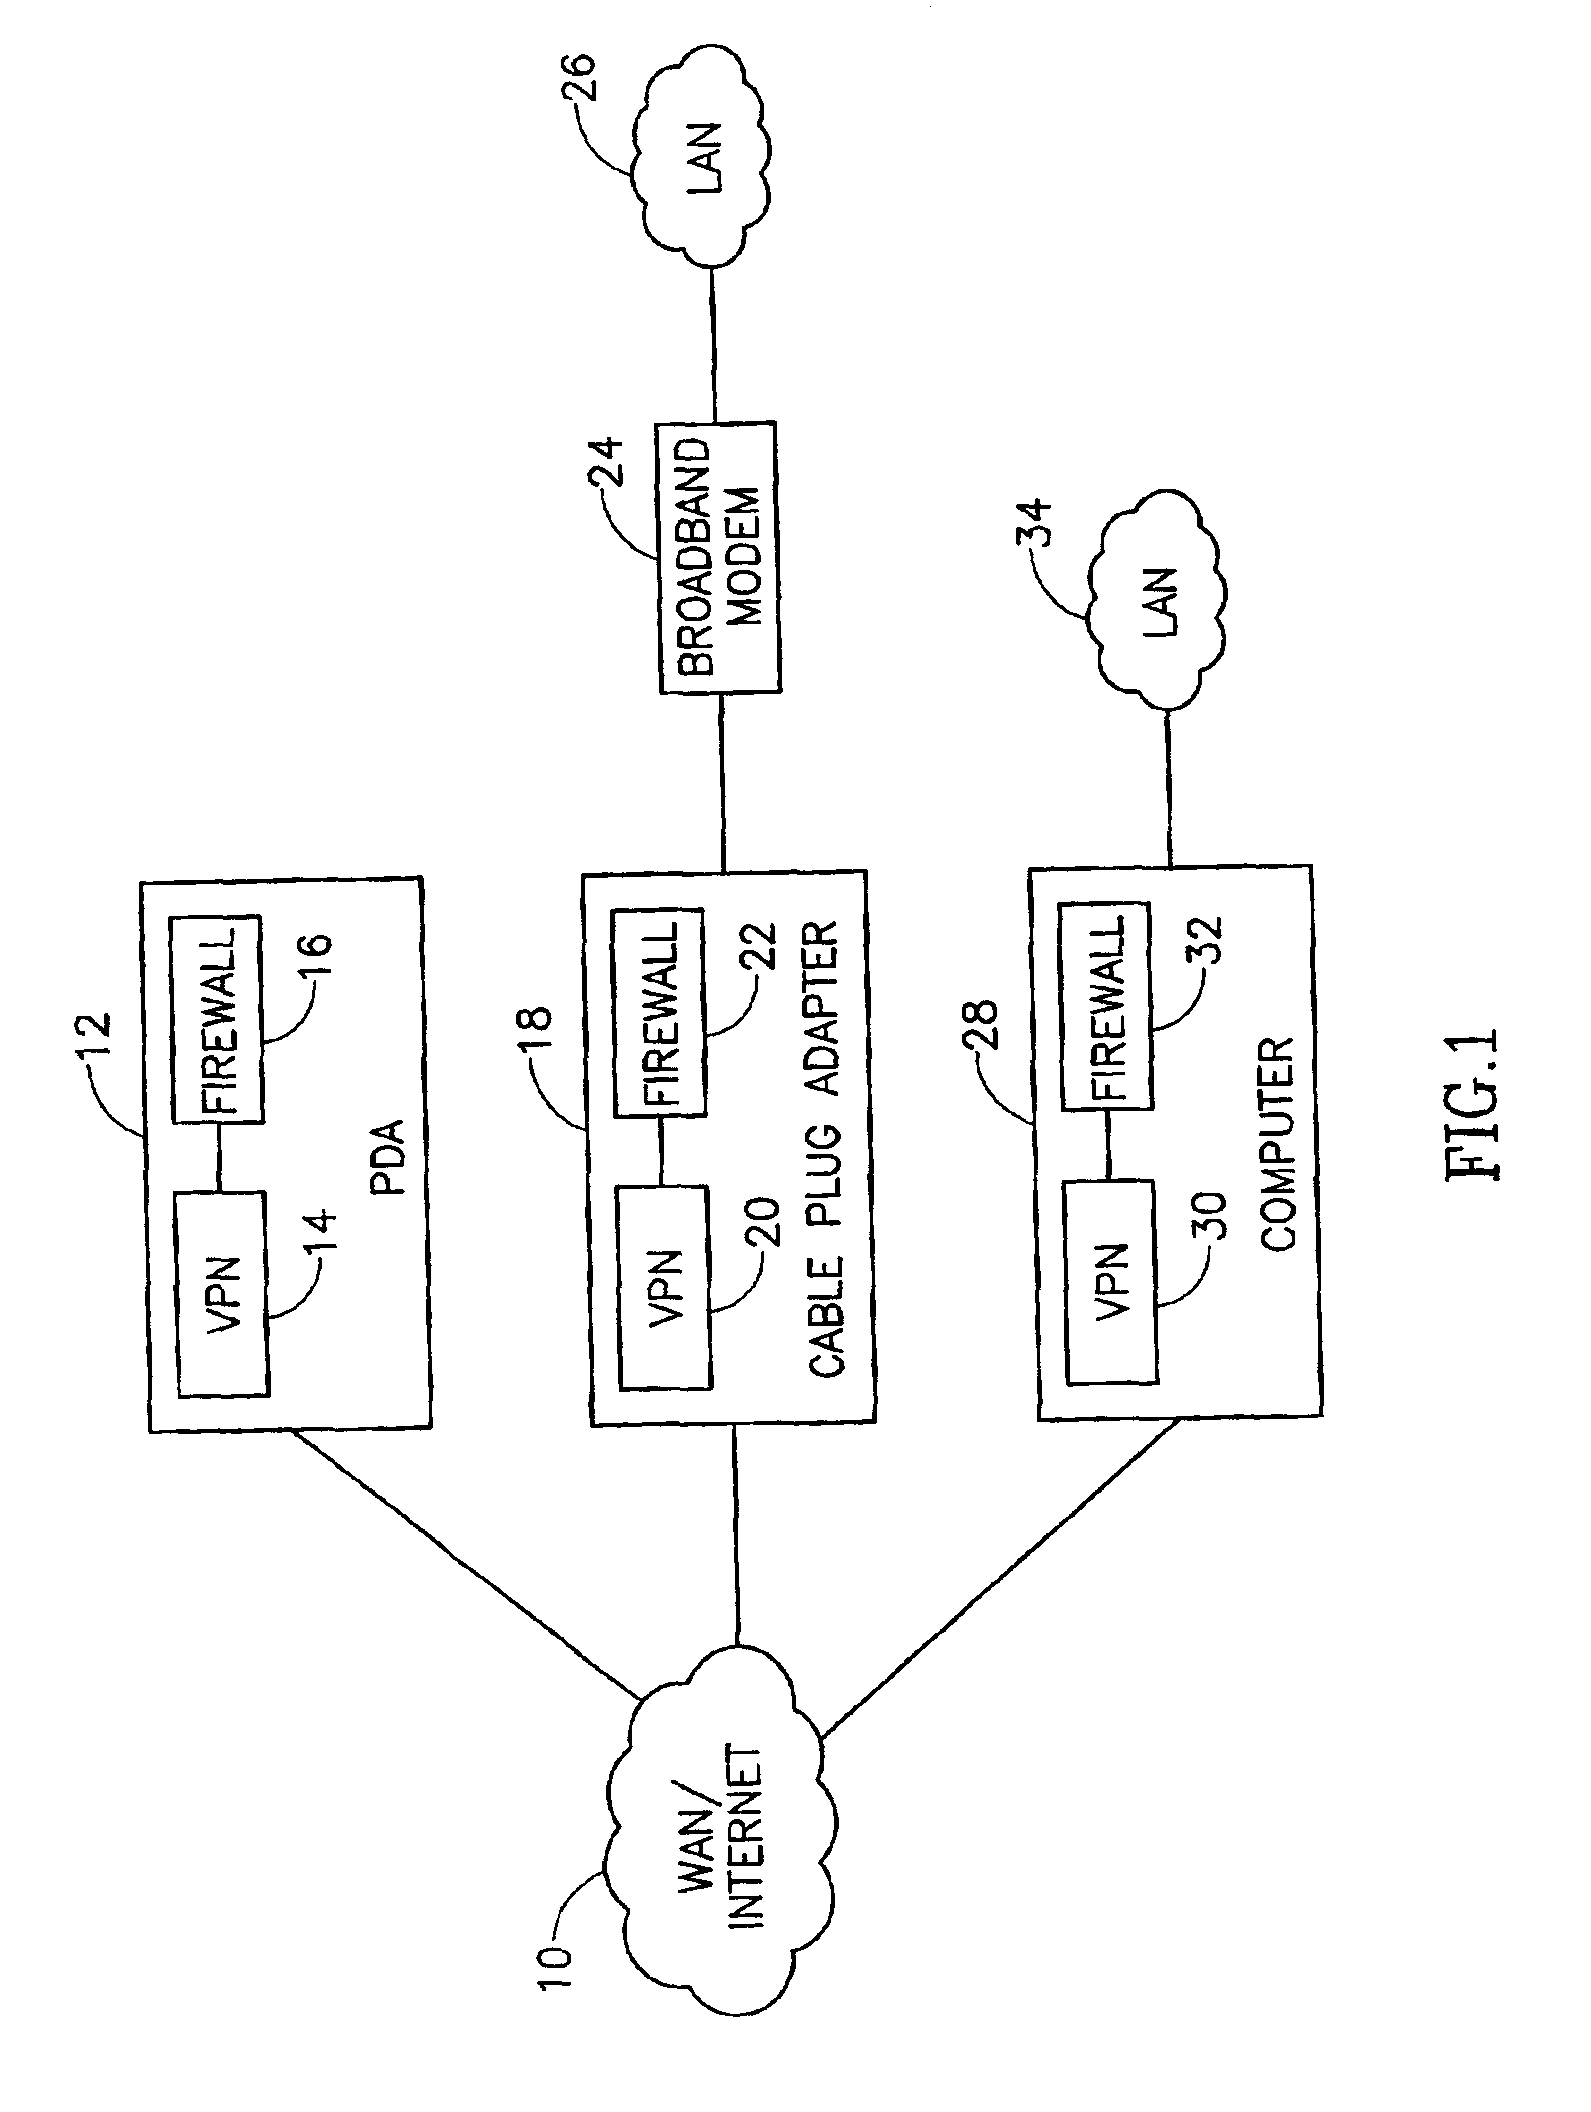 Virtual private network mechanism incorporating security association processor